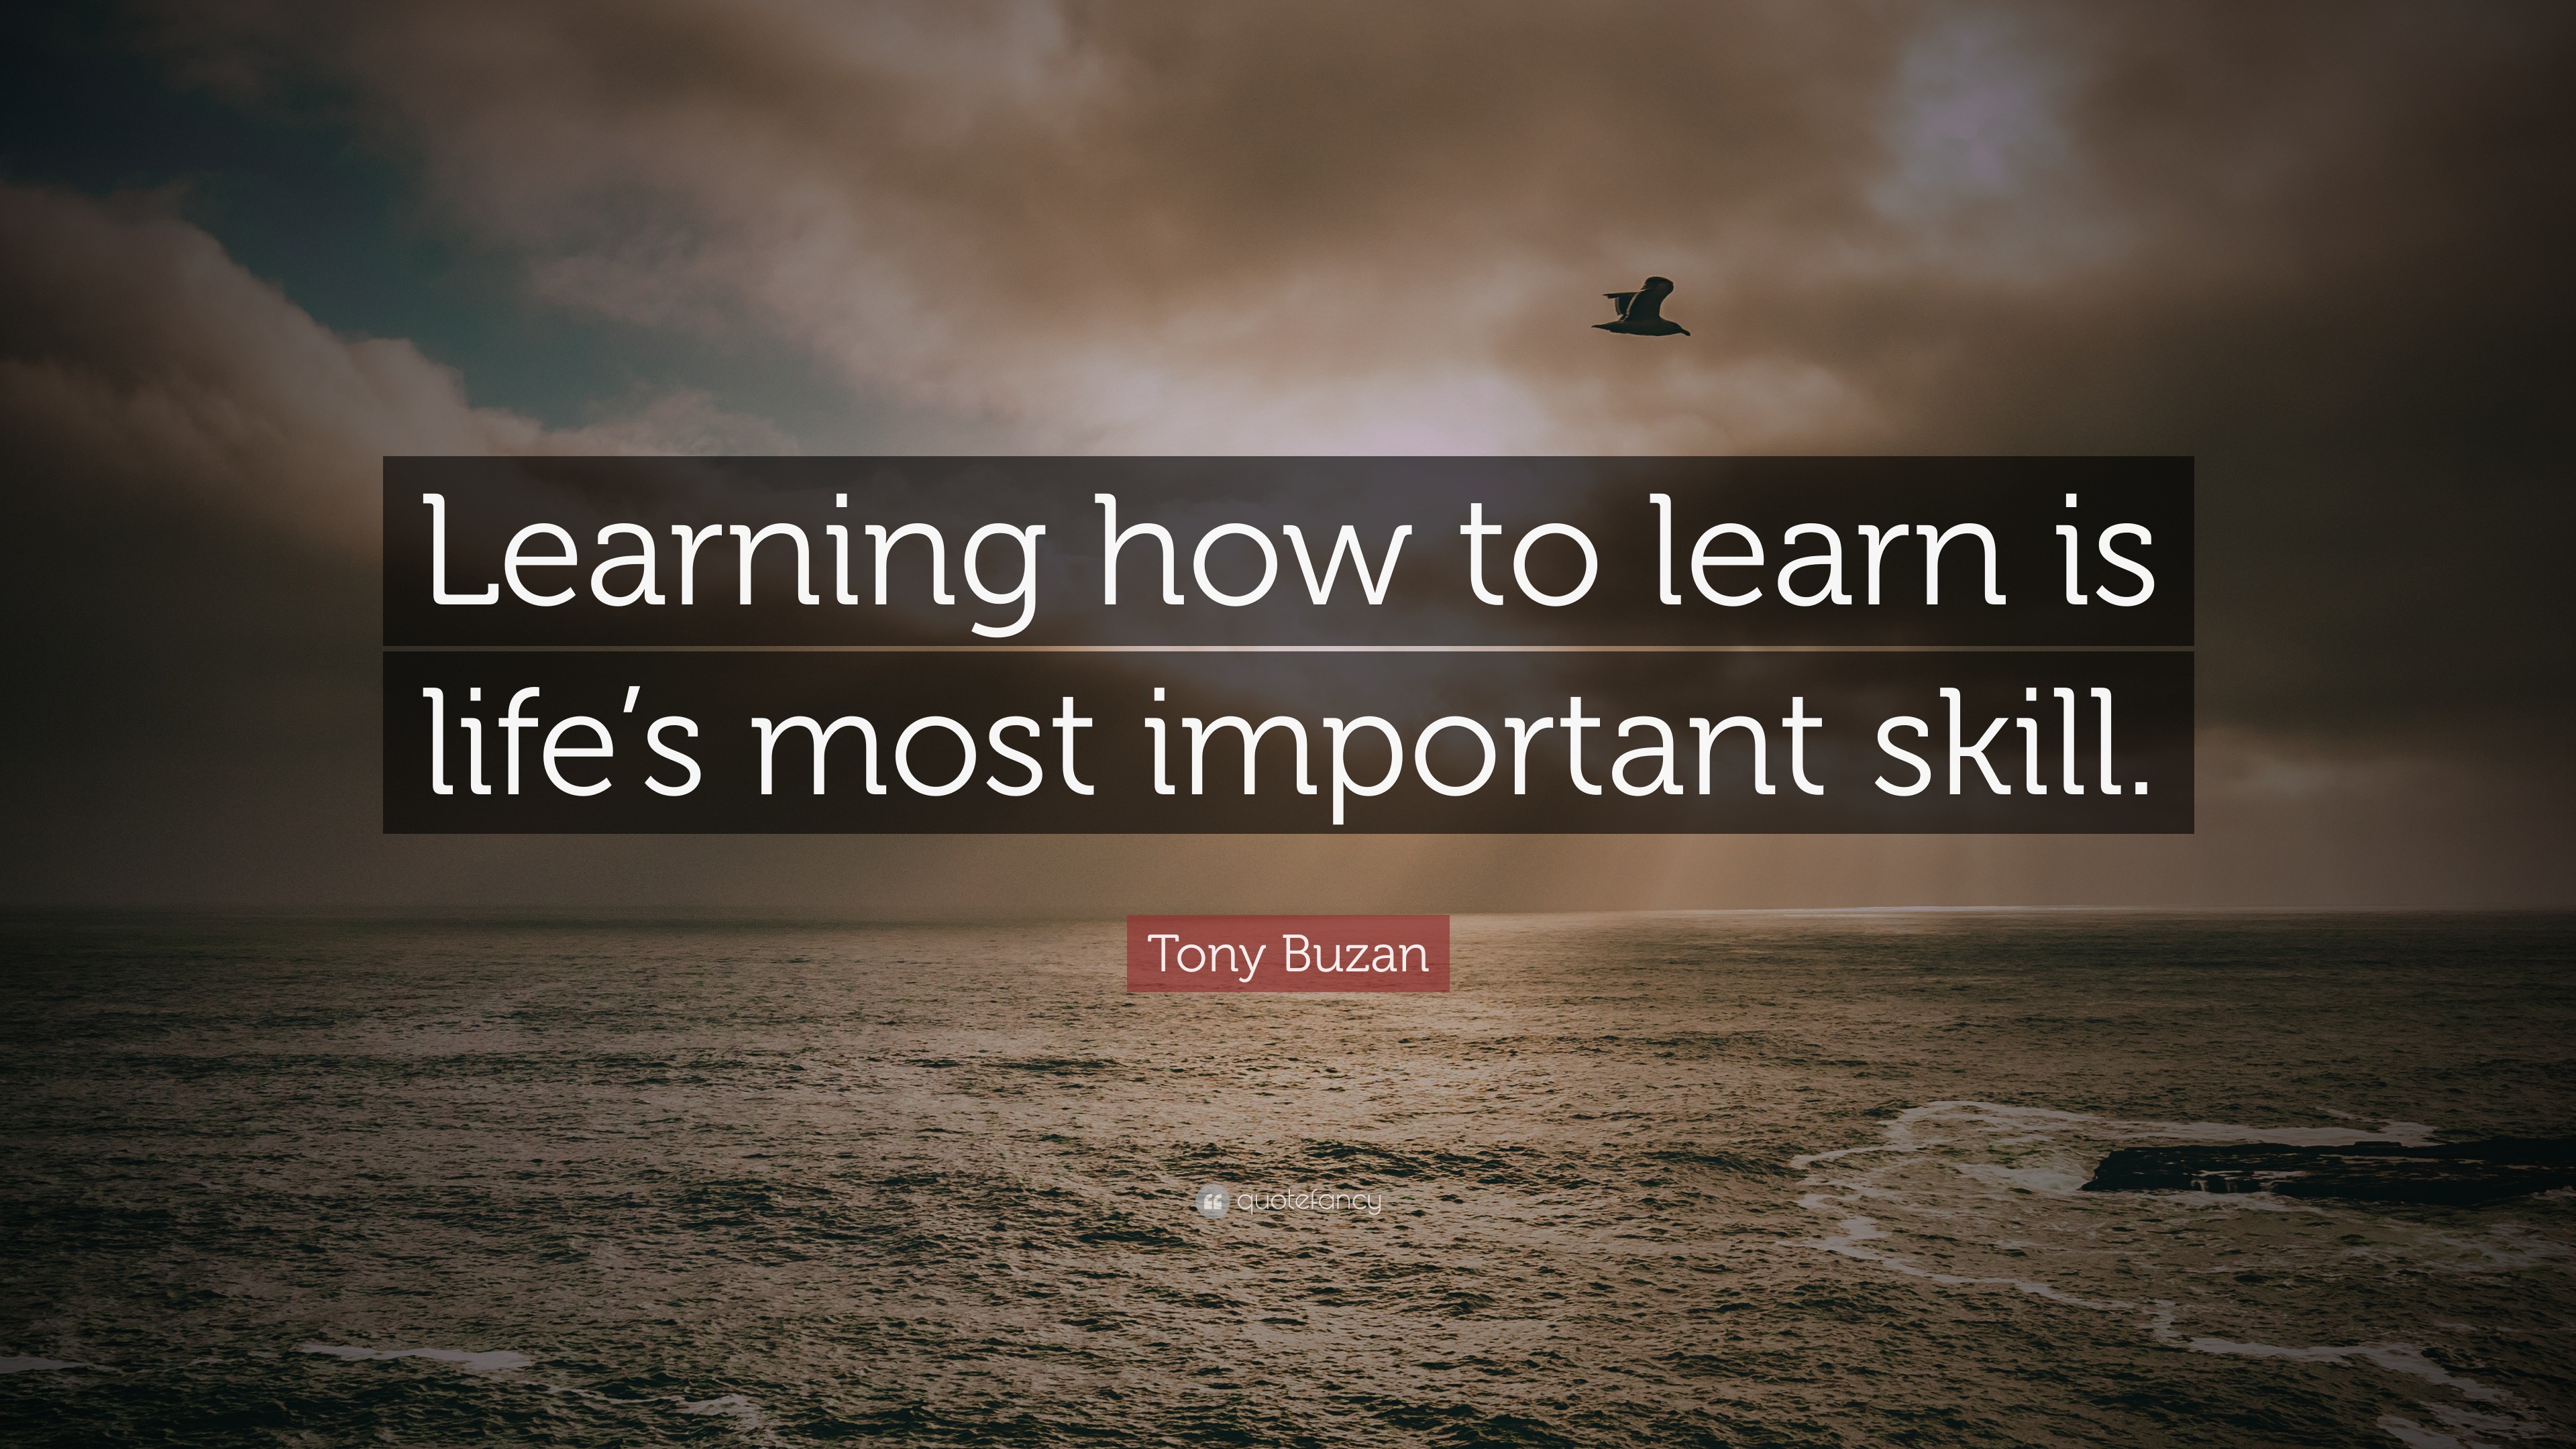 Tony Buzan Quote “learning How To Learn Is Lifes Most Important Skill”